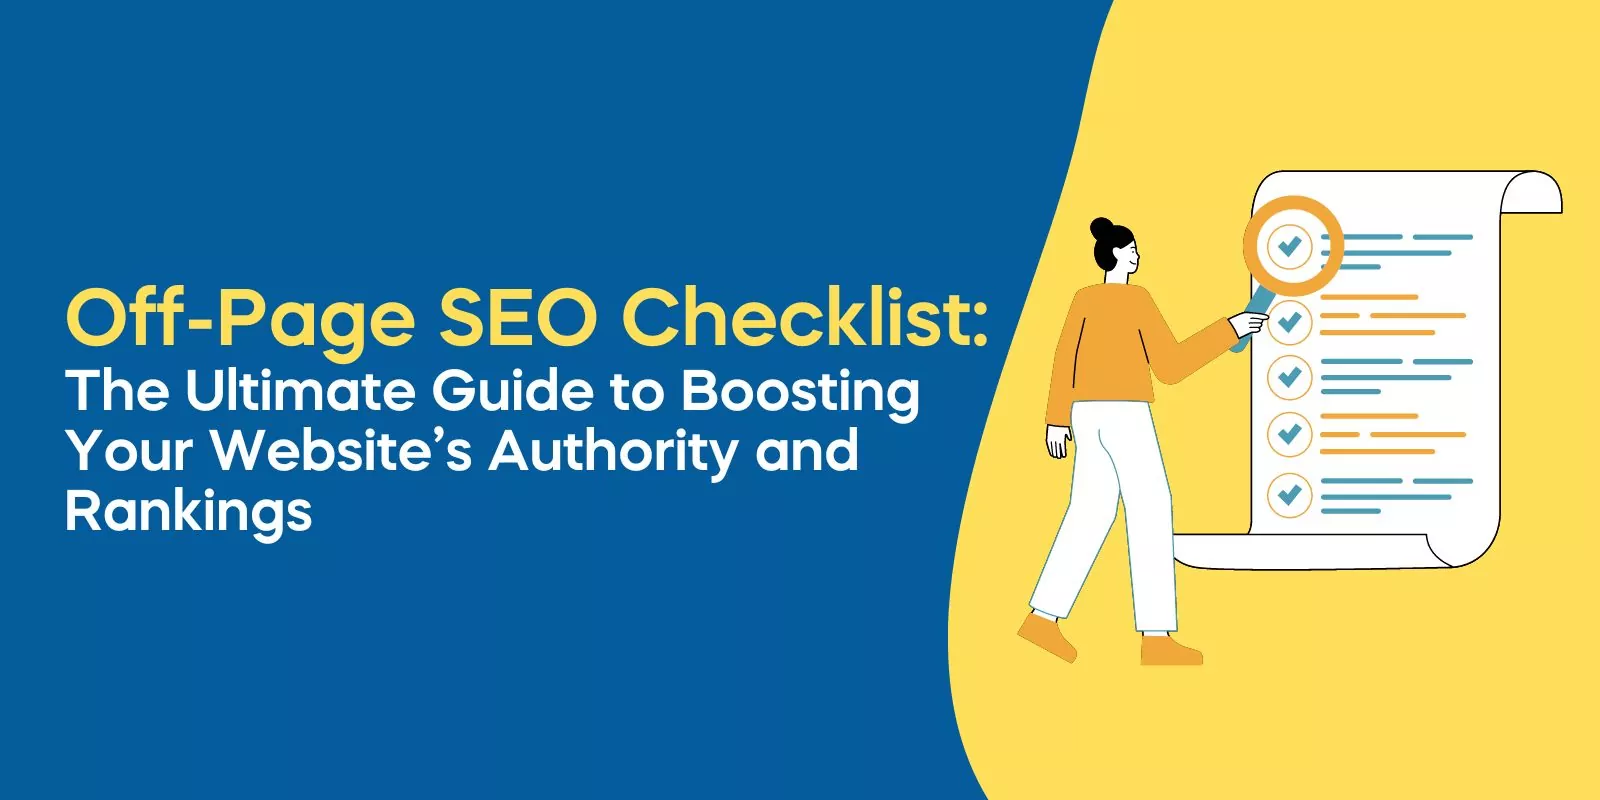 Off-Page SEO Checklist: The Ultimate Guide to Boosting Your Website’s Authority and Rankings